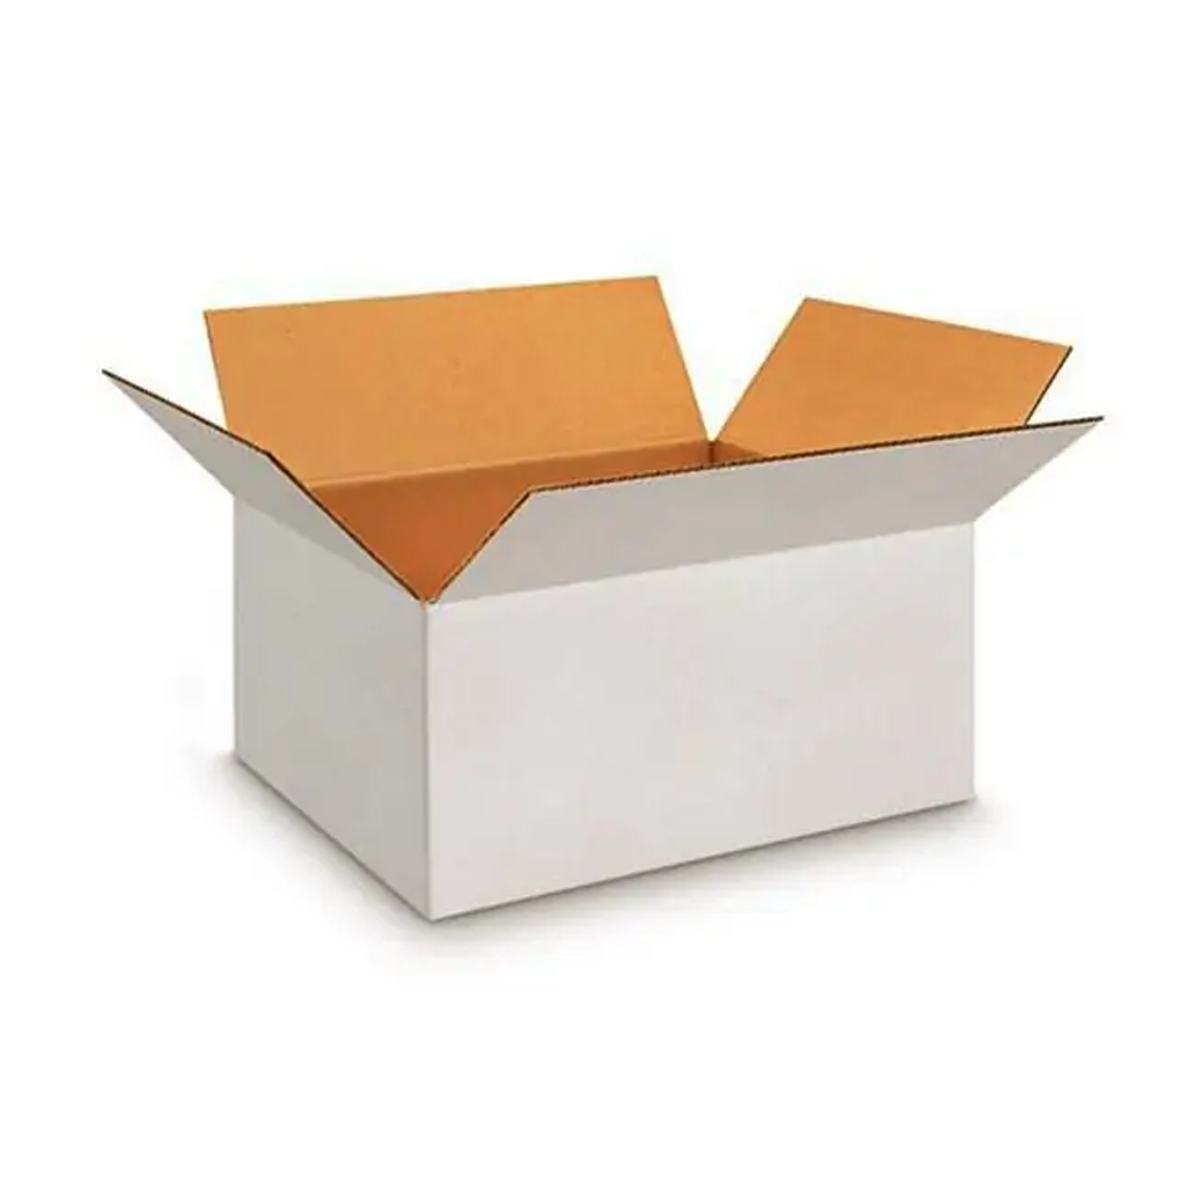 5 Ply Plain Strong White Corrugated/Carton/Packaging/Shipping Box (62 x 25 x 33 Cms) Corrugated Box (10Pc Pack) - Willow